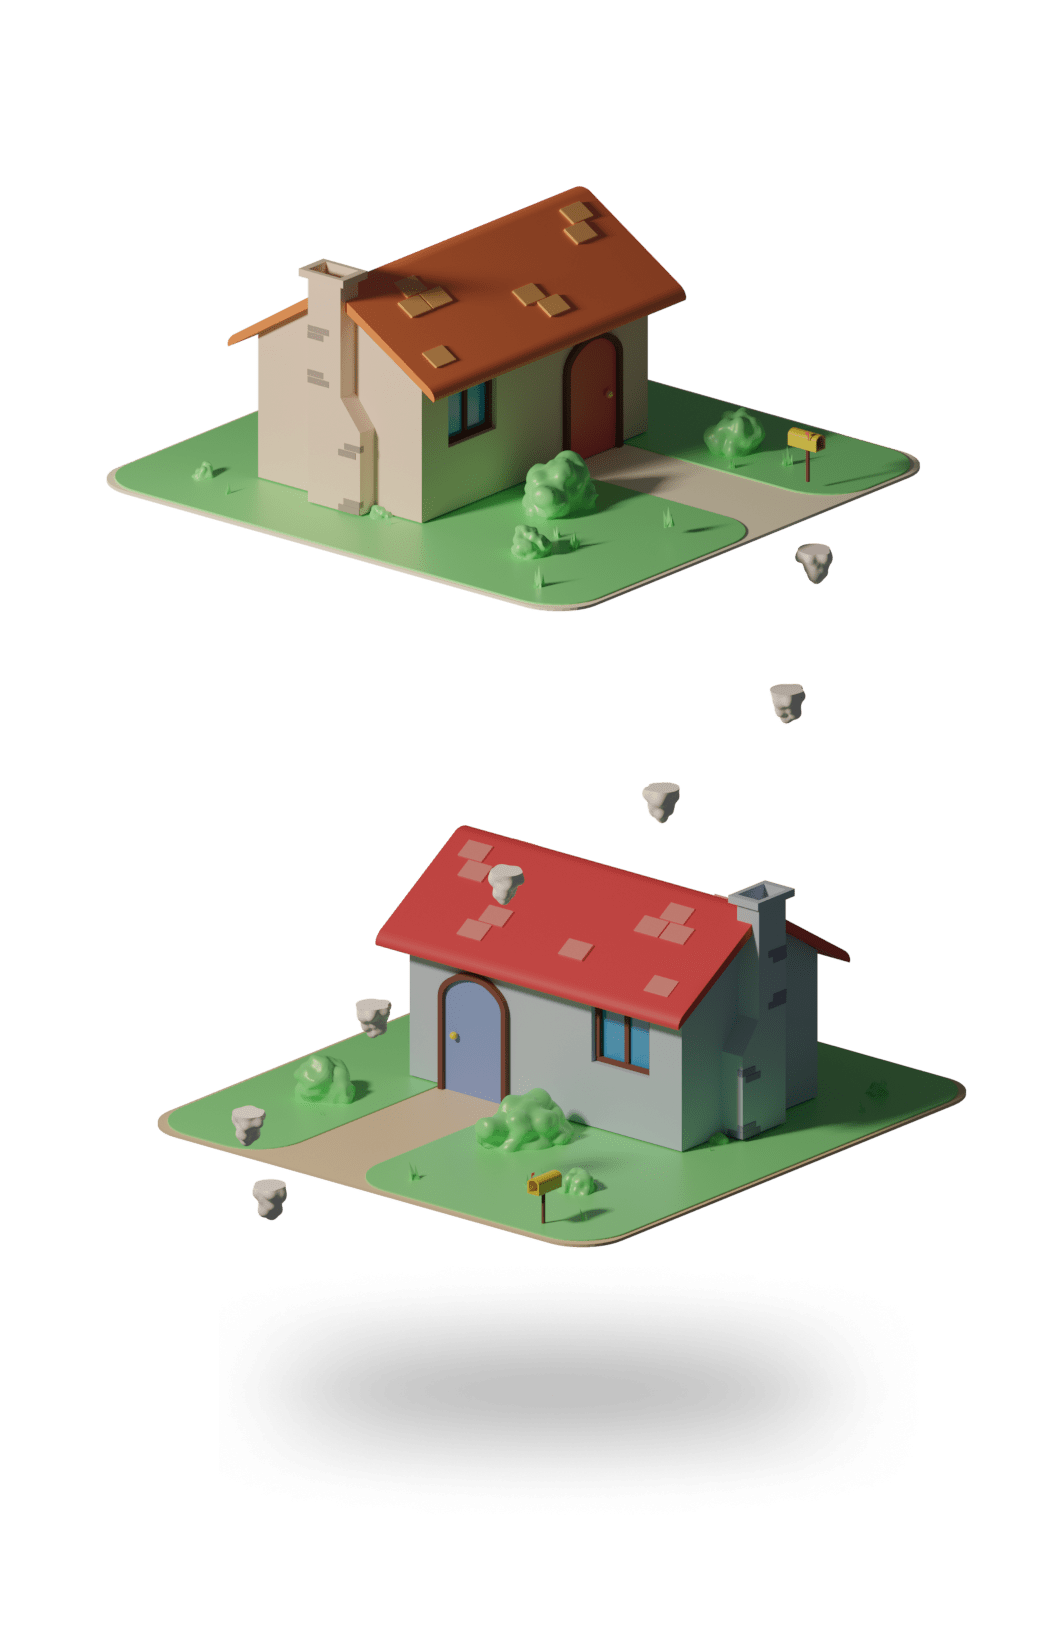 2 floating houses